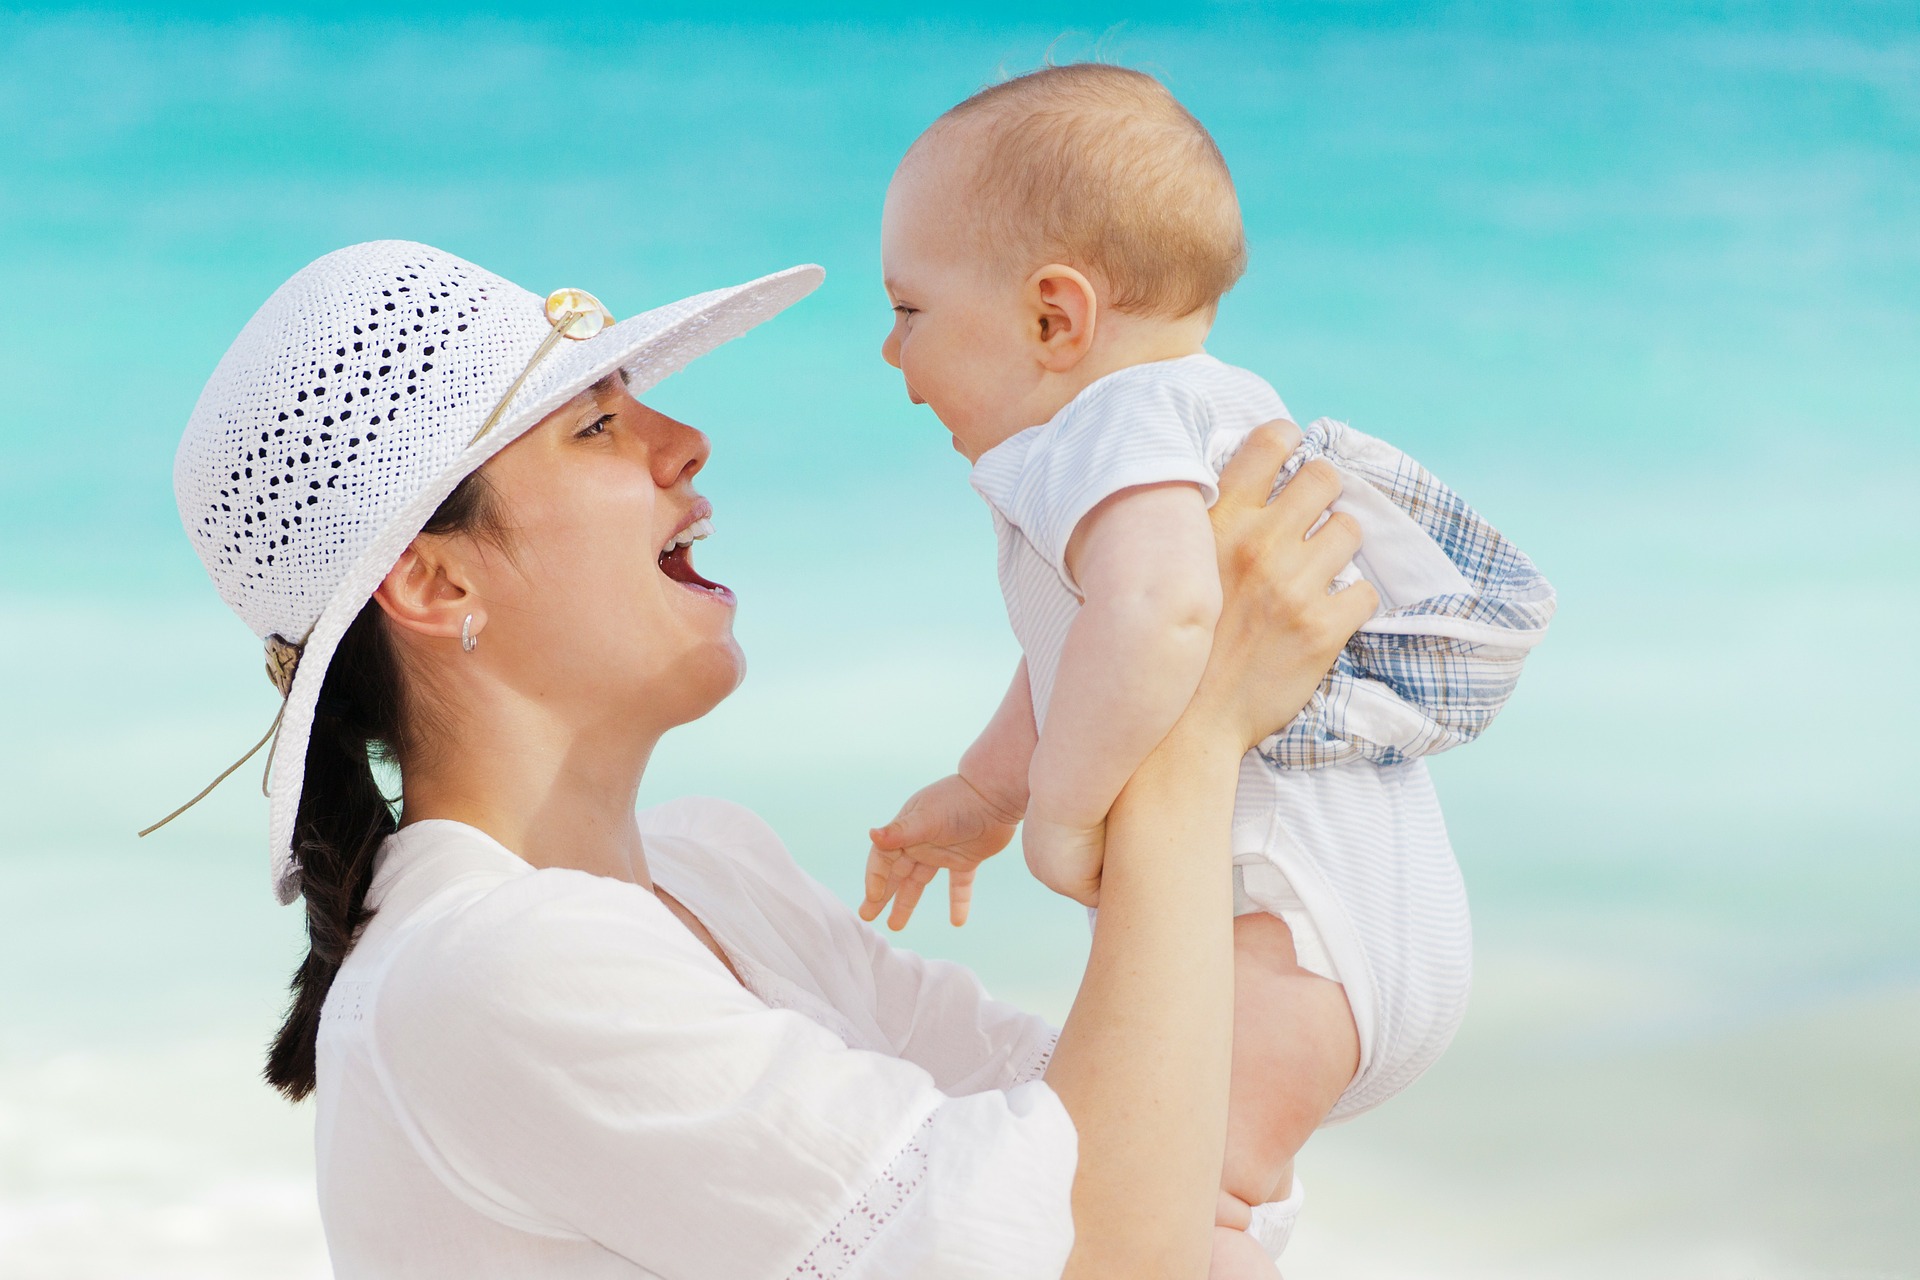 A Mother is holding baby up and smiling. They are at a beach.